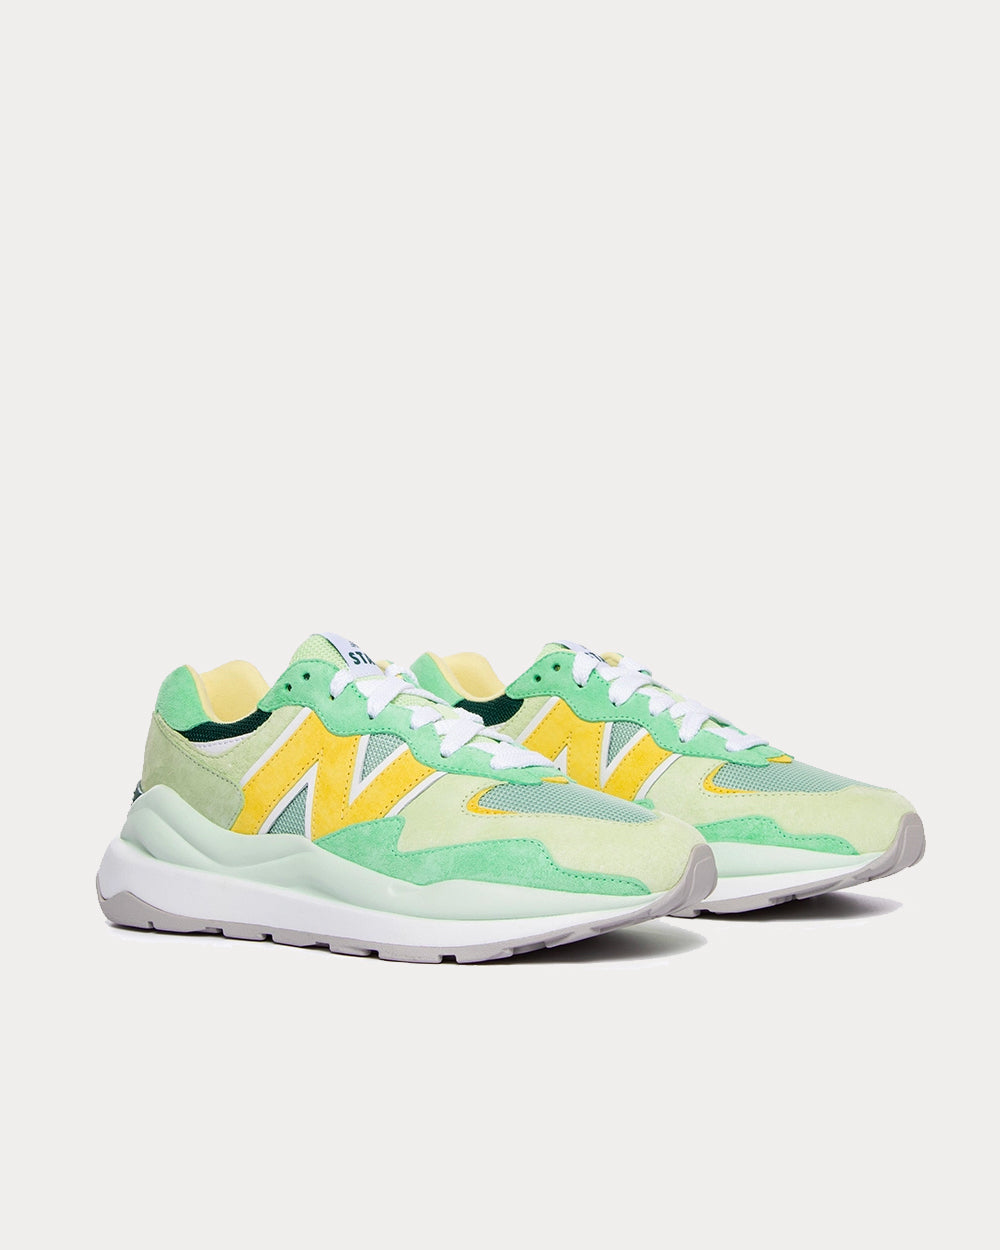 New Balance x Staud - 57/40 Agave with Green Low Top Sneakers